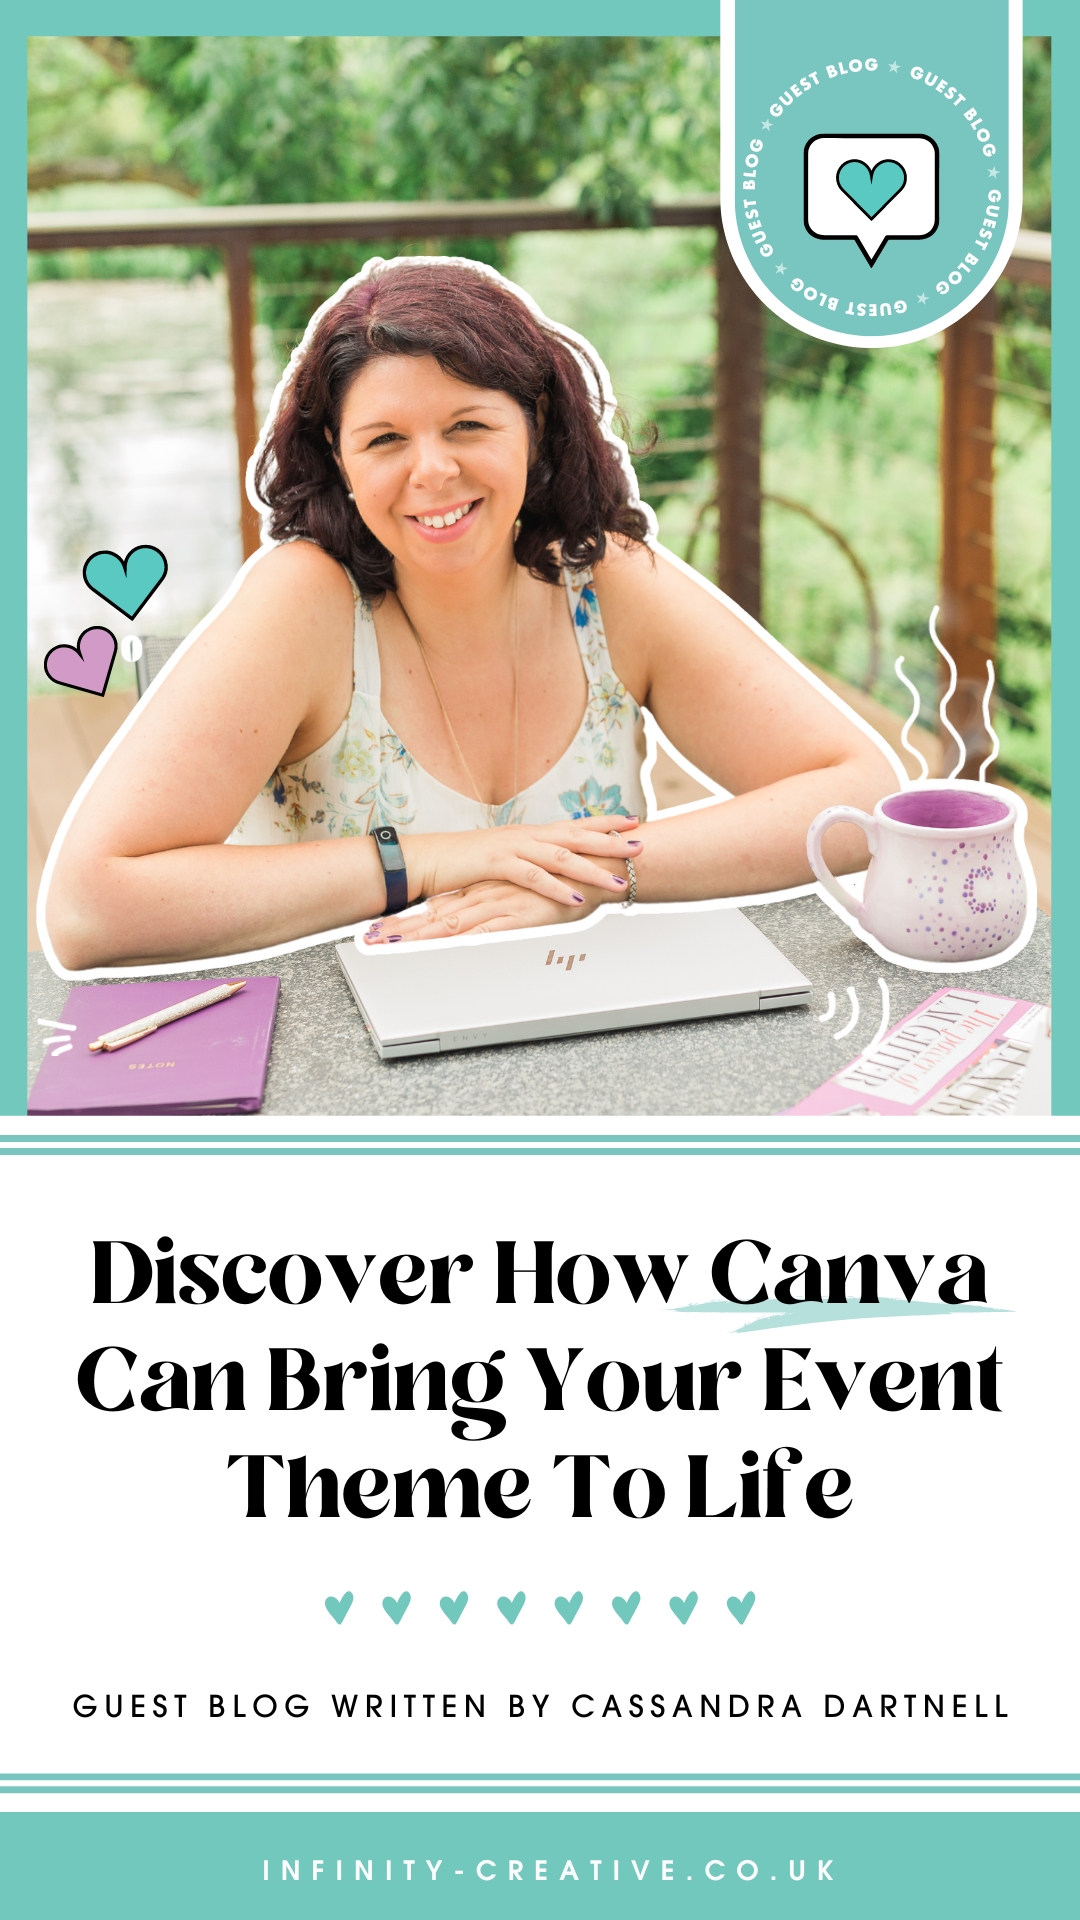 Discover How Canva Can Bring Your Event Theme To Life